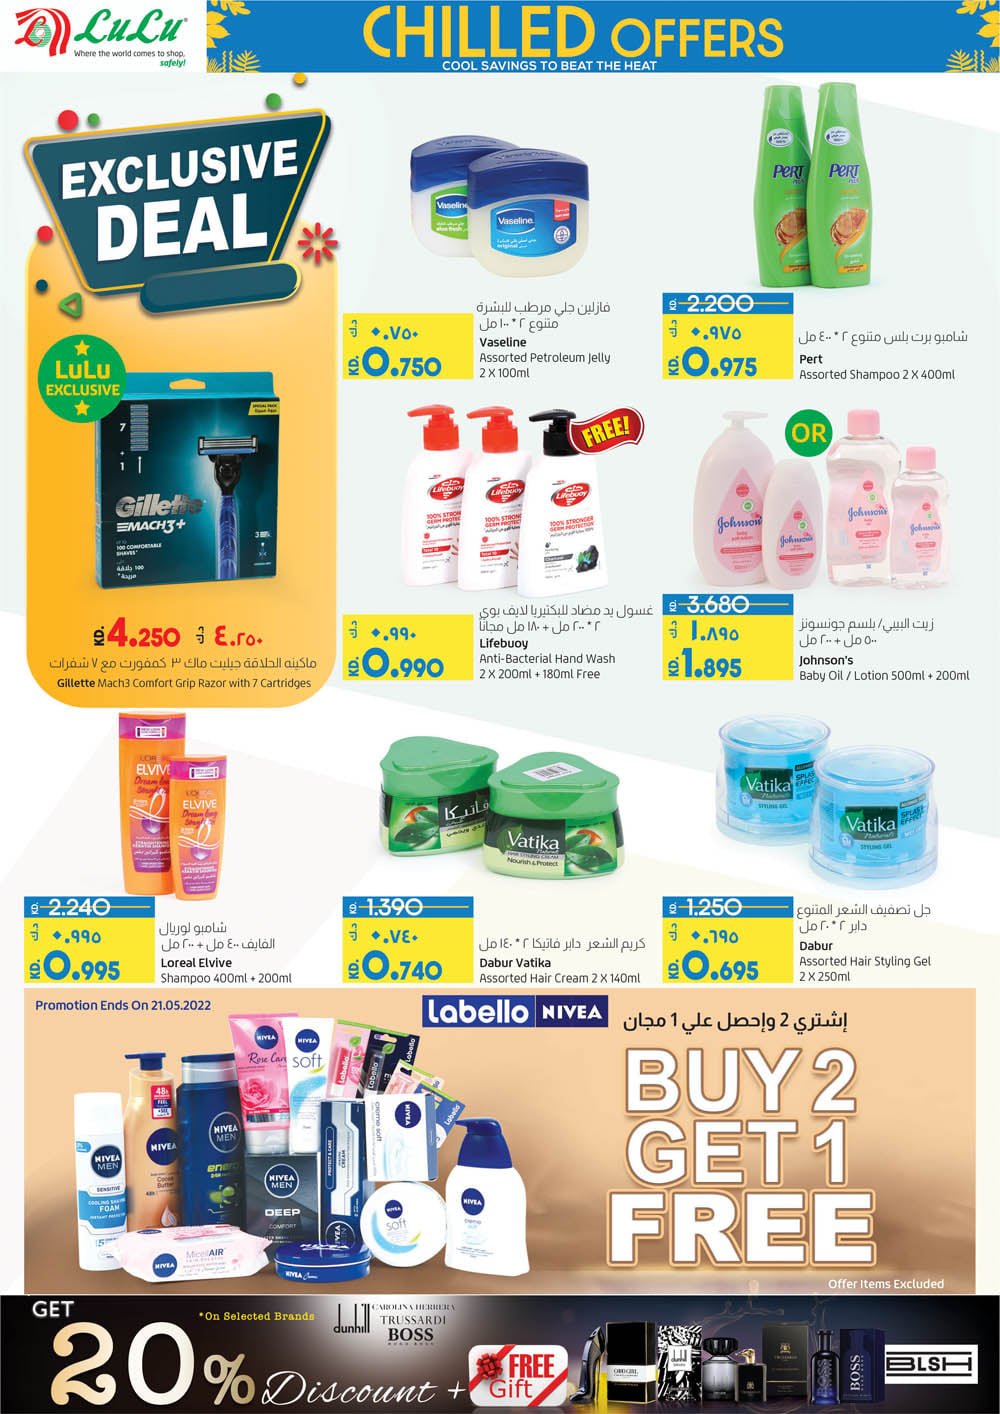 Lulu Hypermarket Chilled Offers, iiQ8 weekly promotions 7